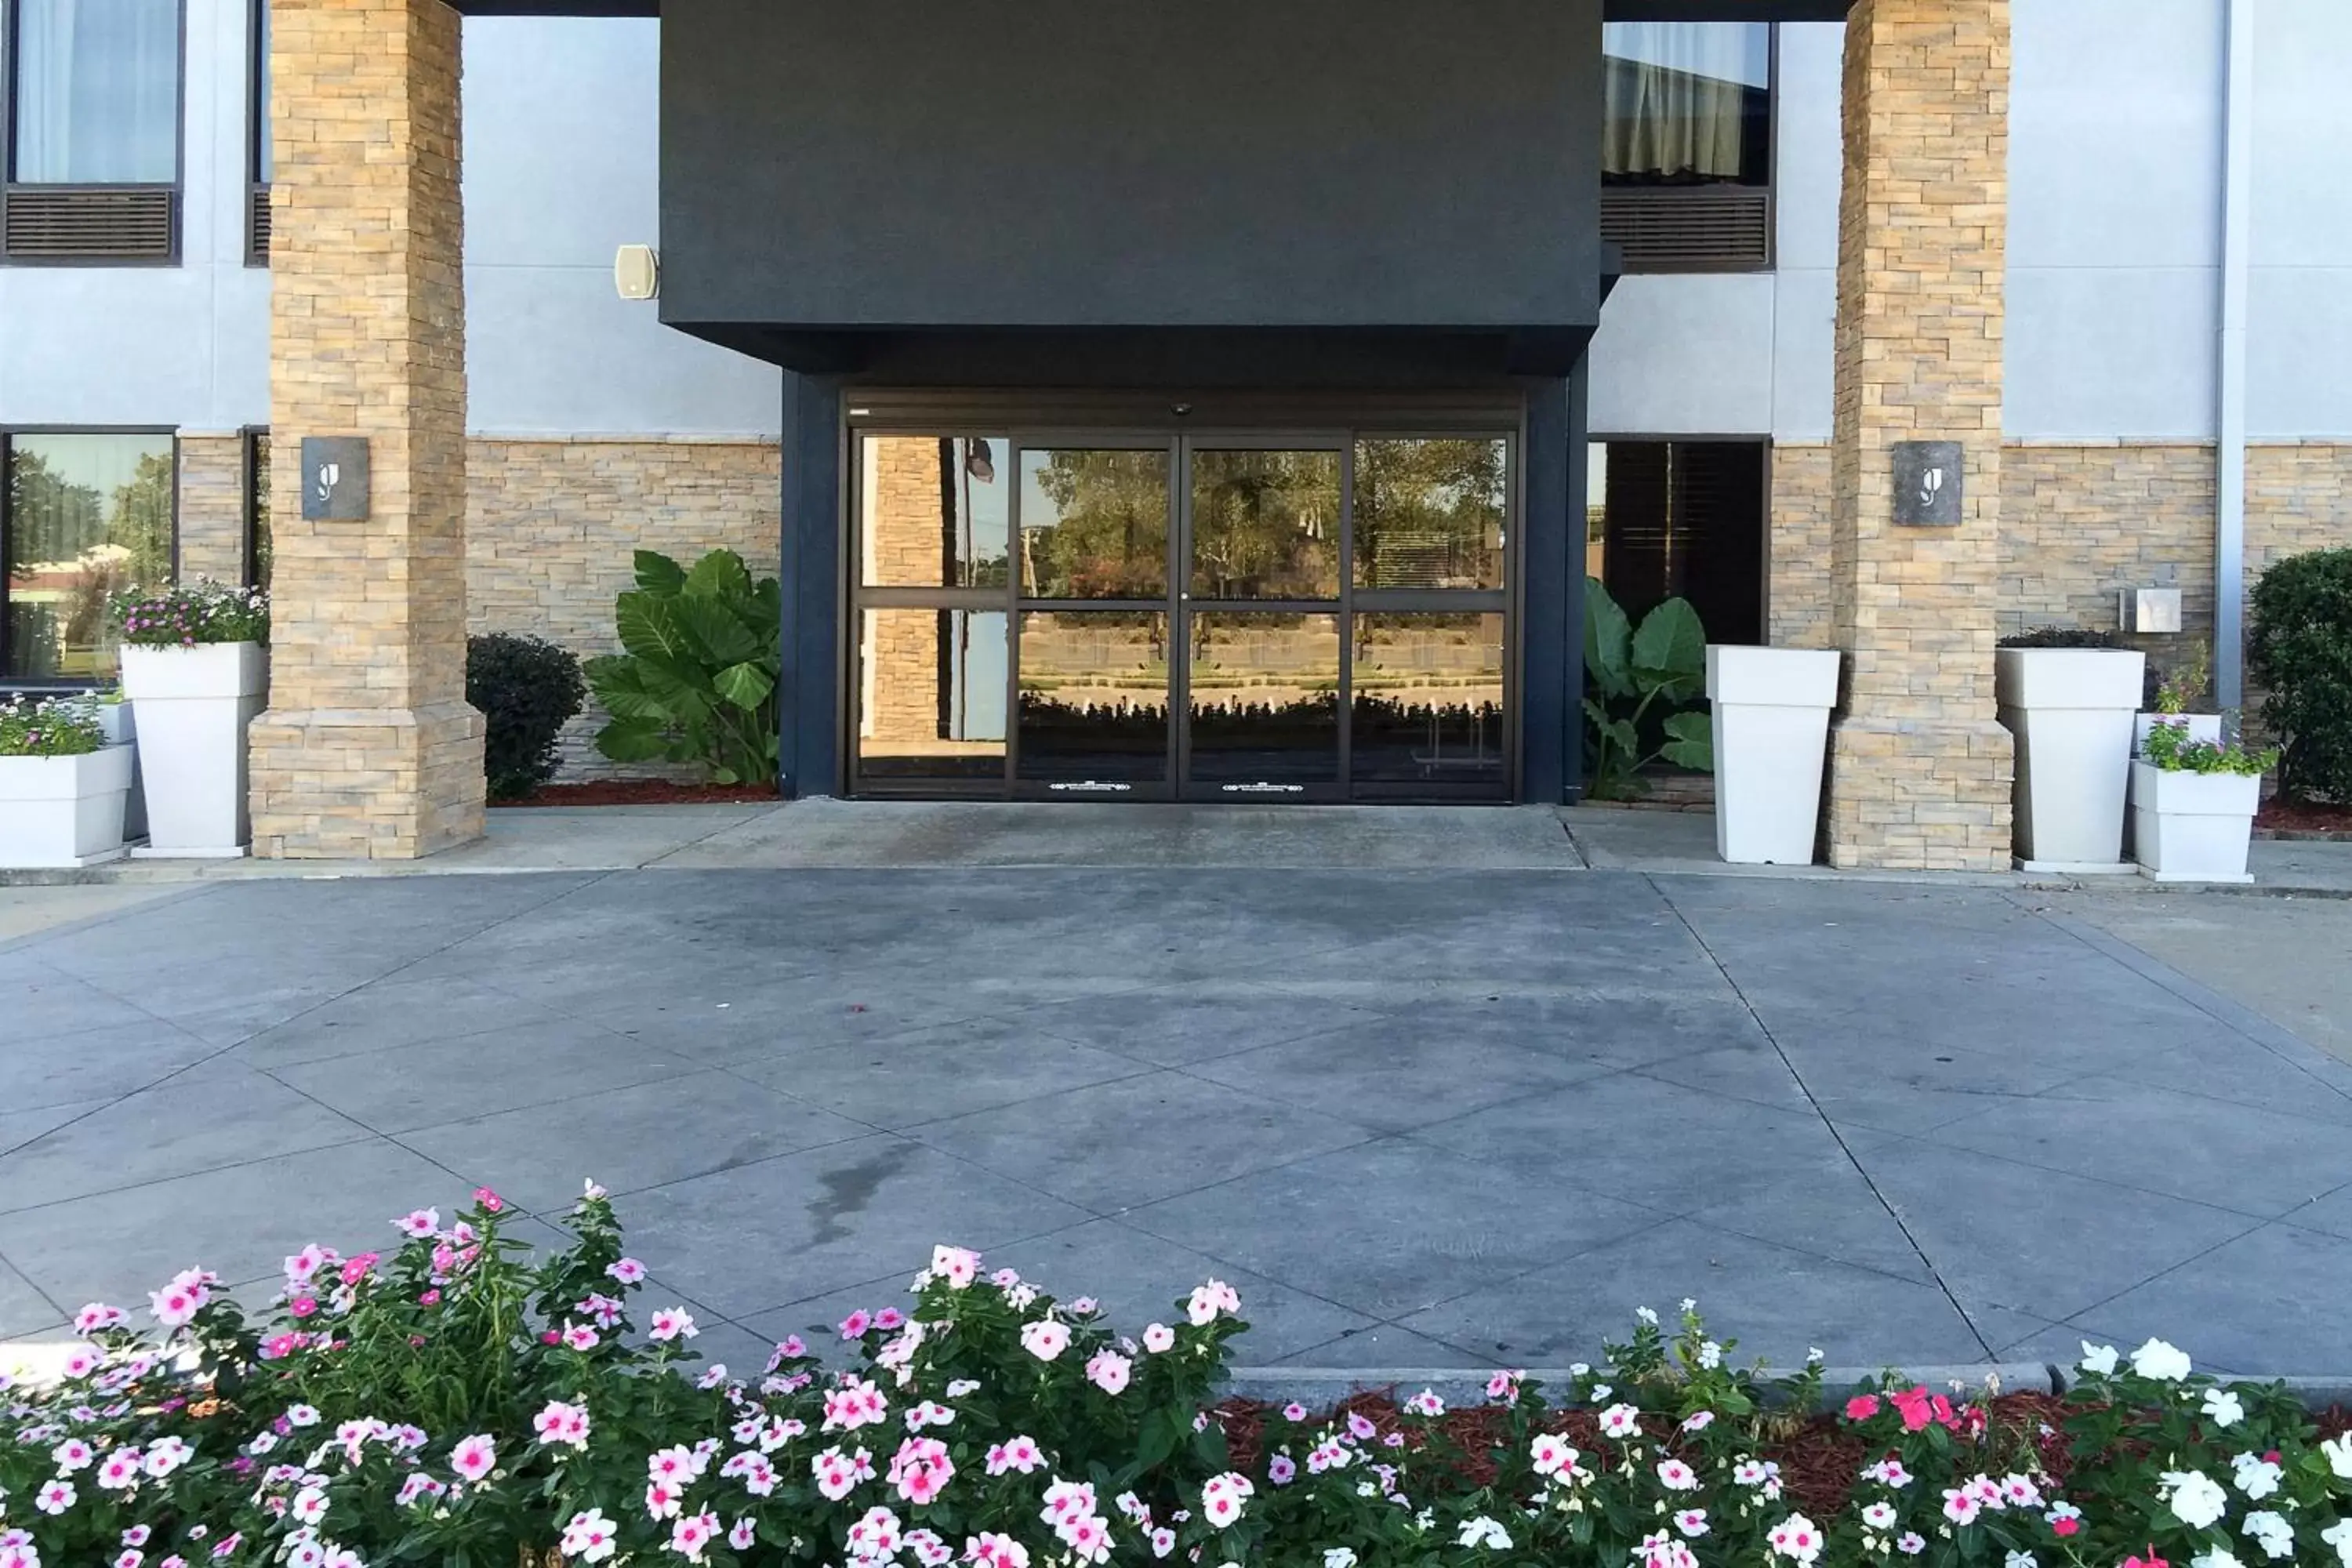 Facade/Entrance in Country Inn & Suites by Radisson, Bryant (Little Rock), AR